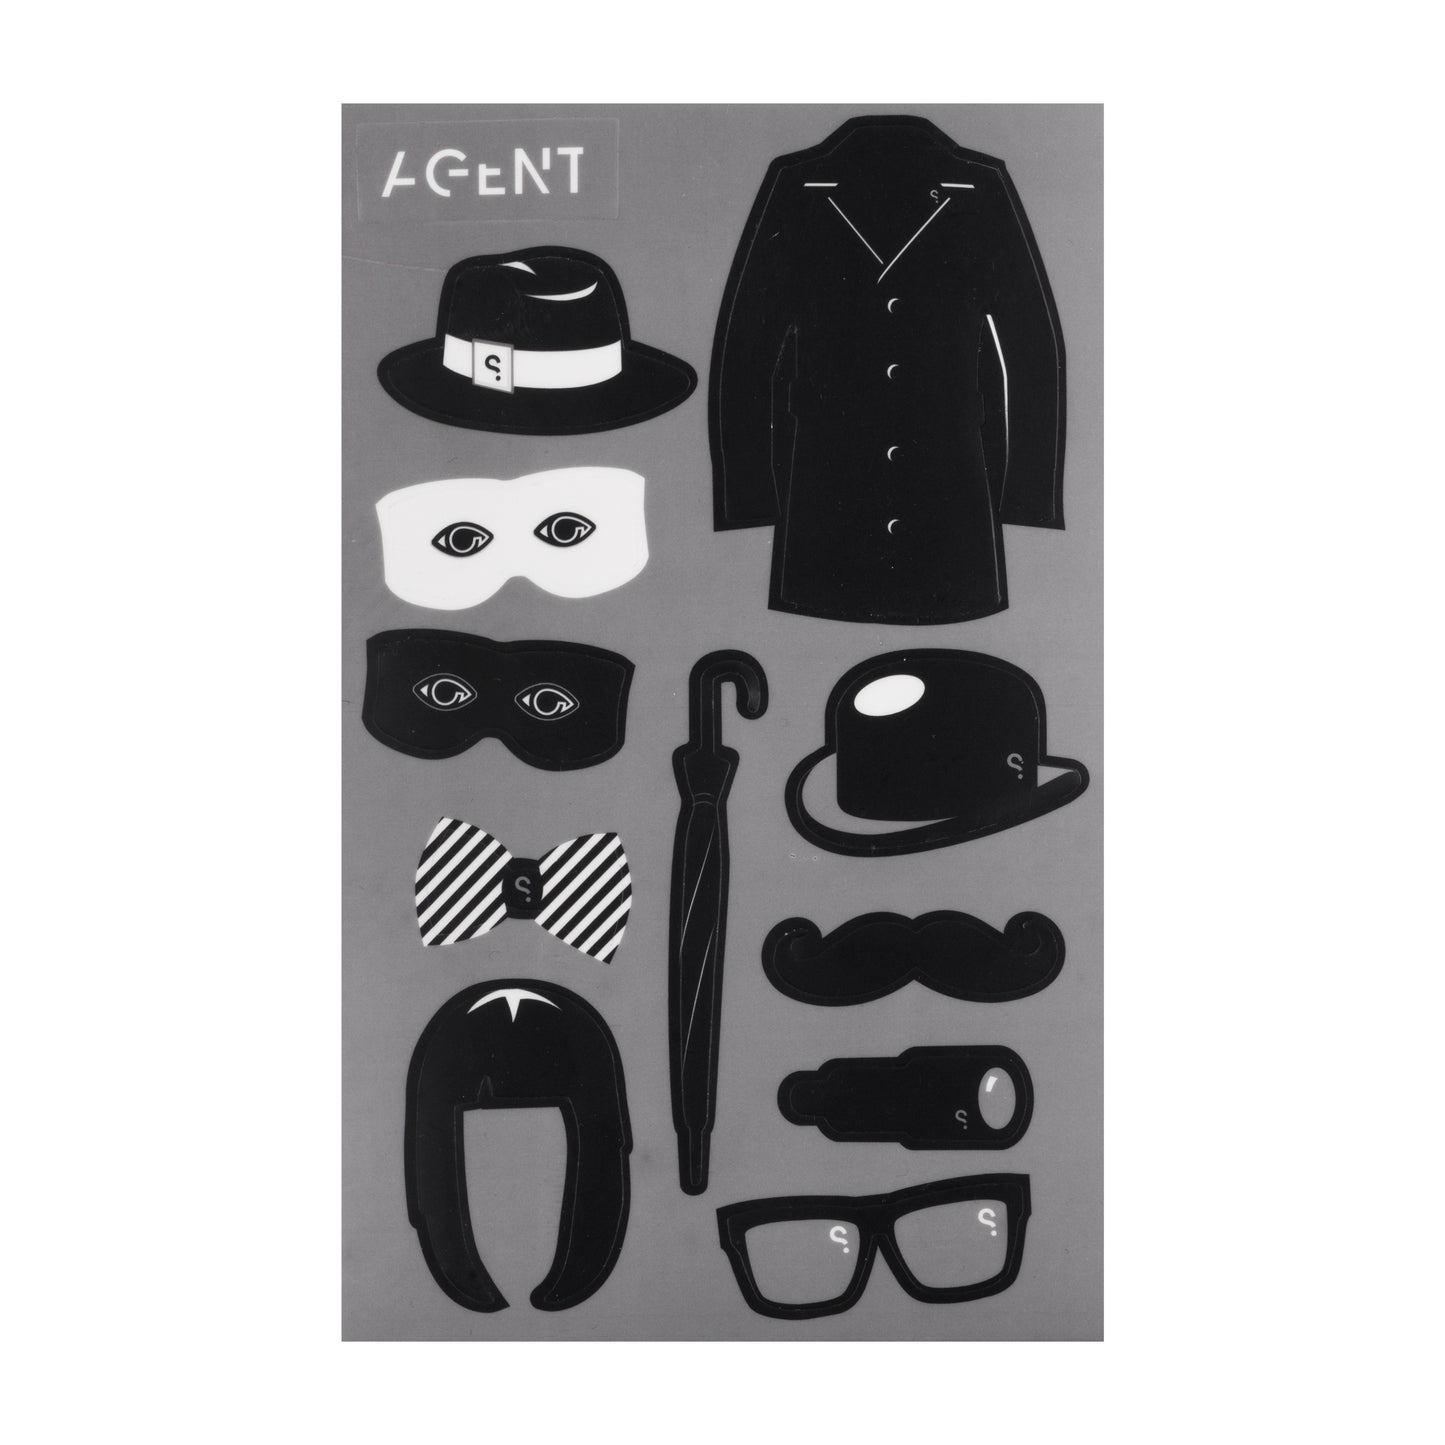 SPYSCAPE Hacker and Agent Decal Book - 